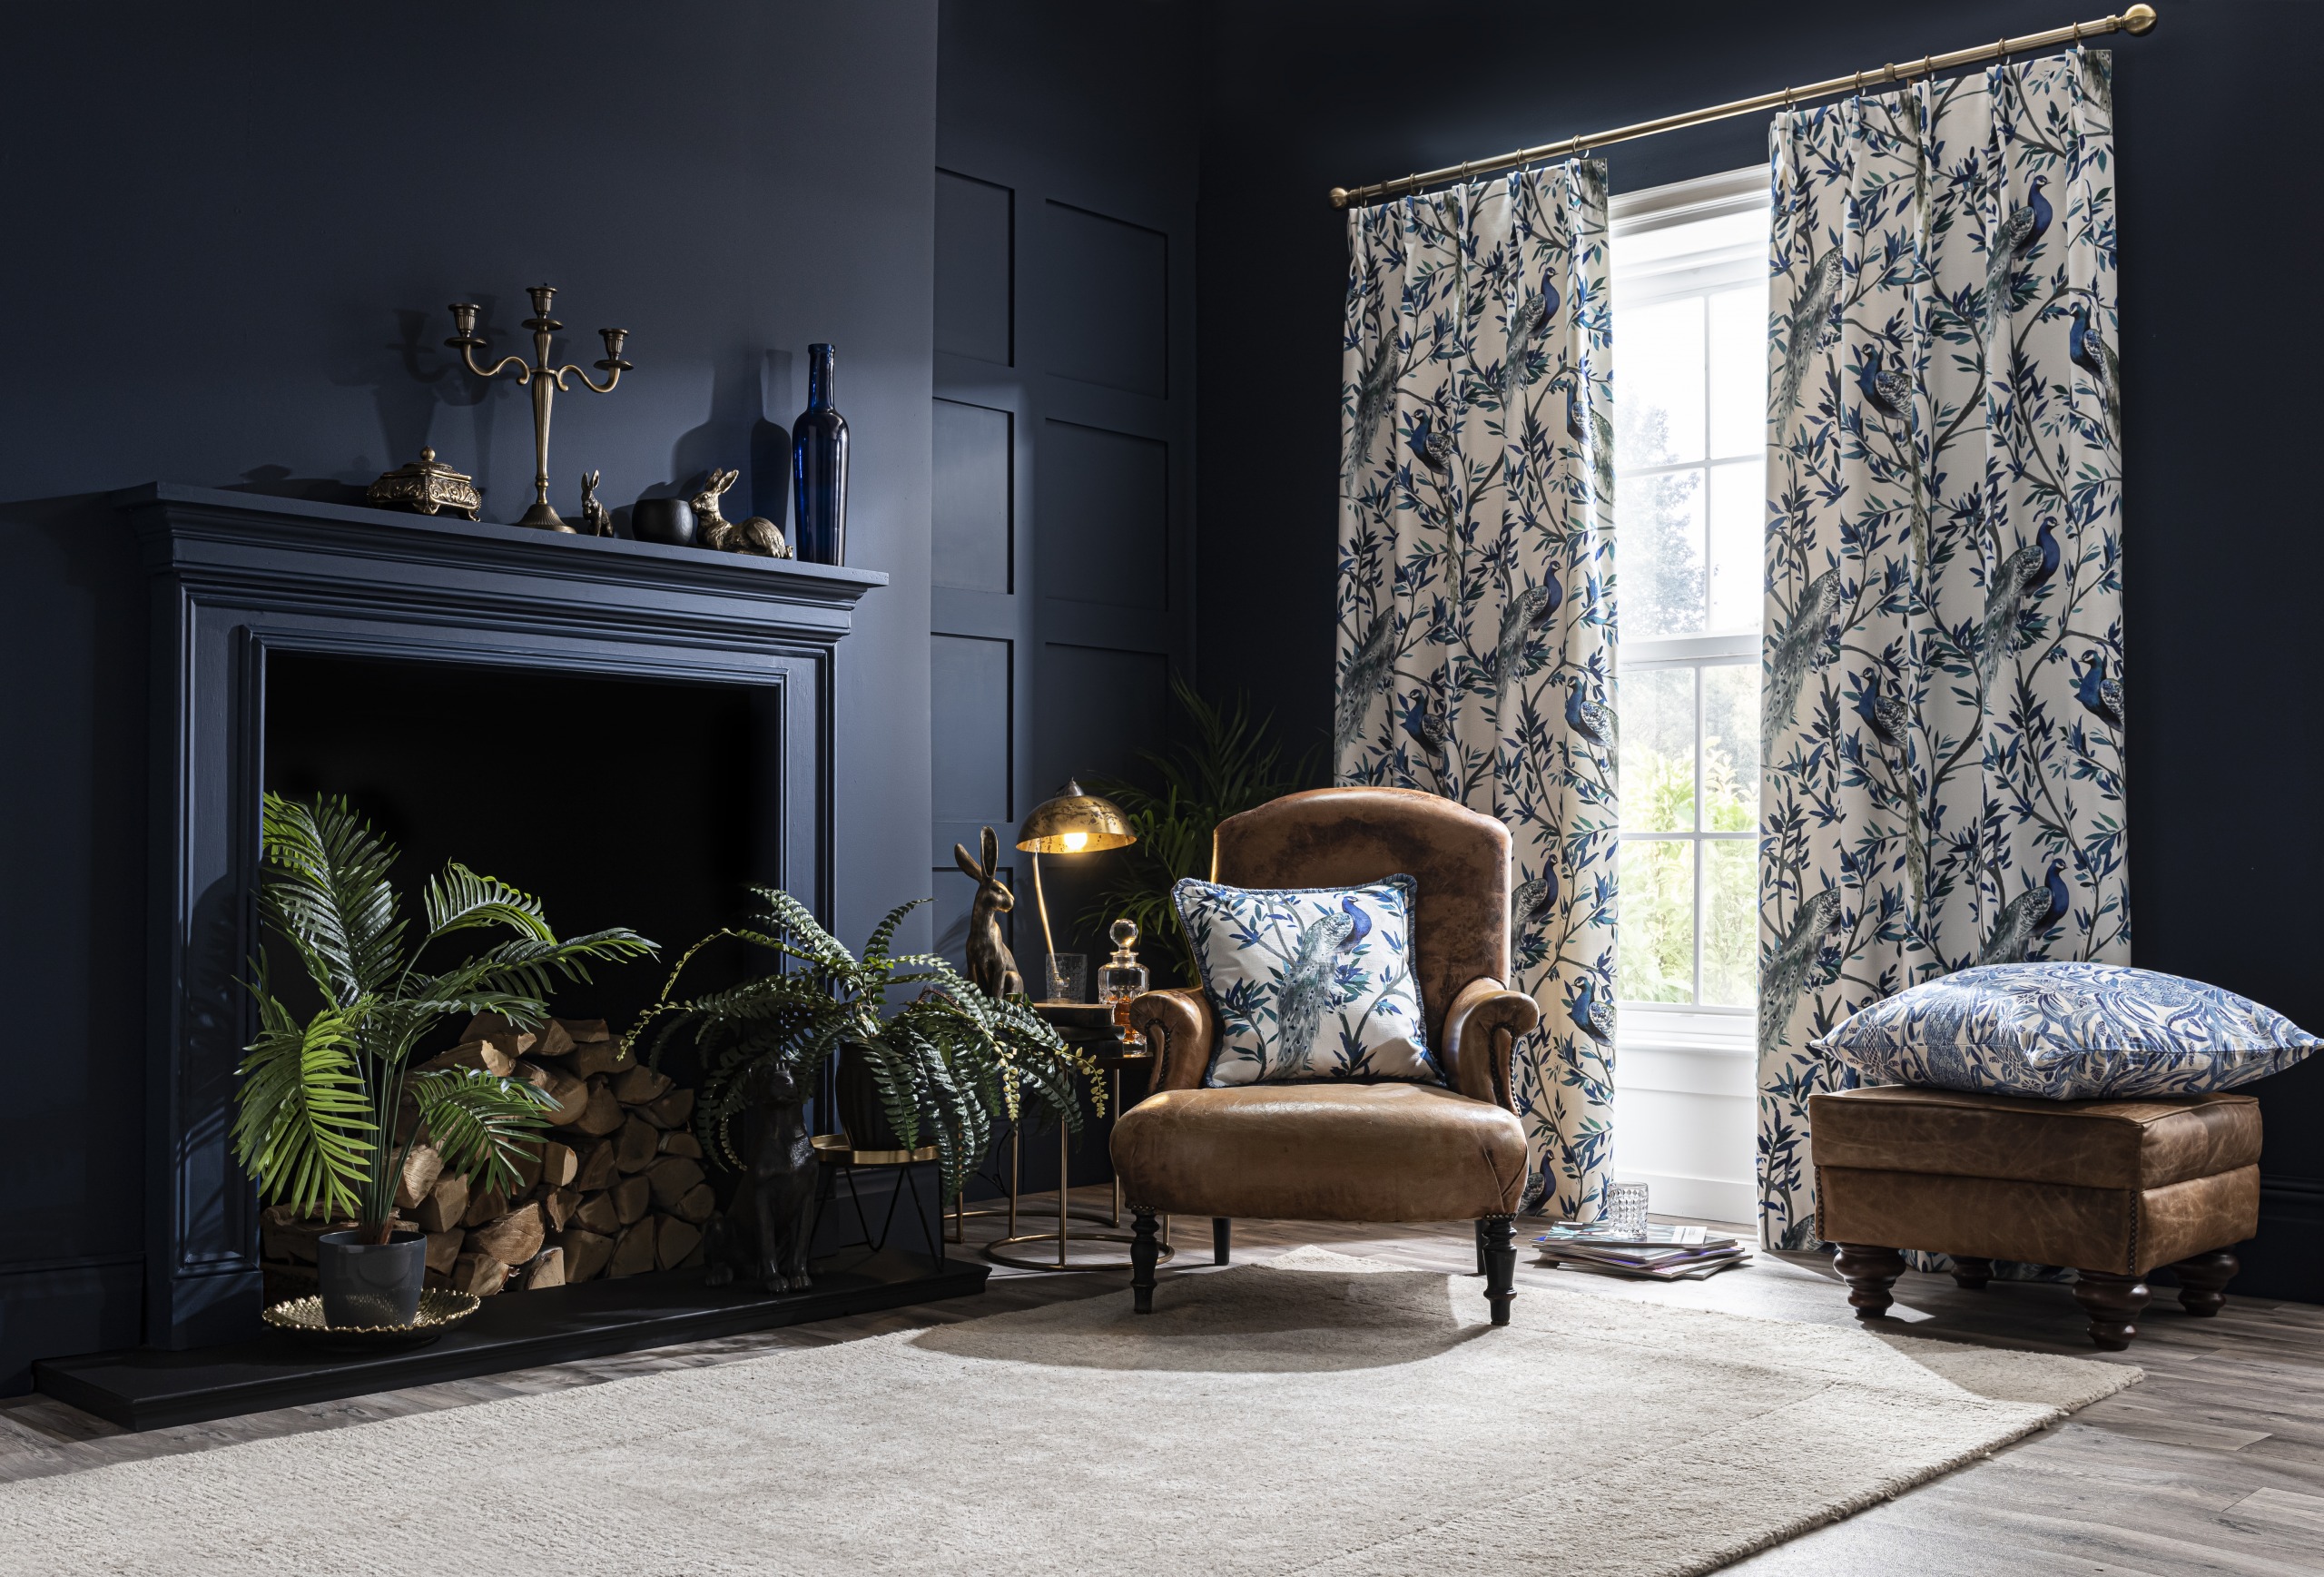 INVIGORATE YOUR INTERIORS WITH OUR NEW CURTAIN AND ROMAN BLIND COLLECTION